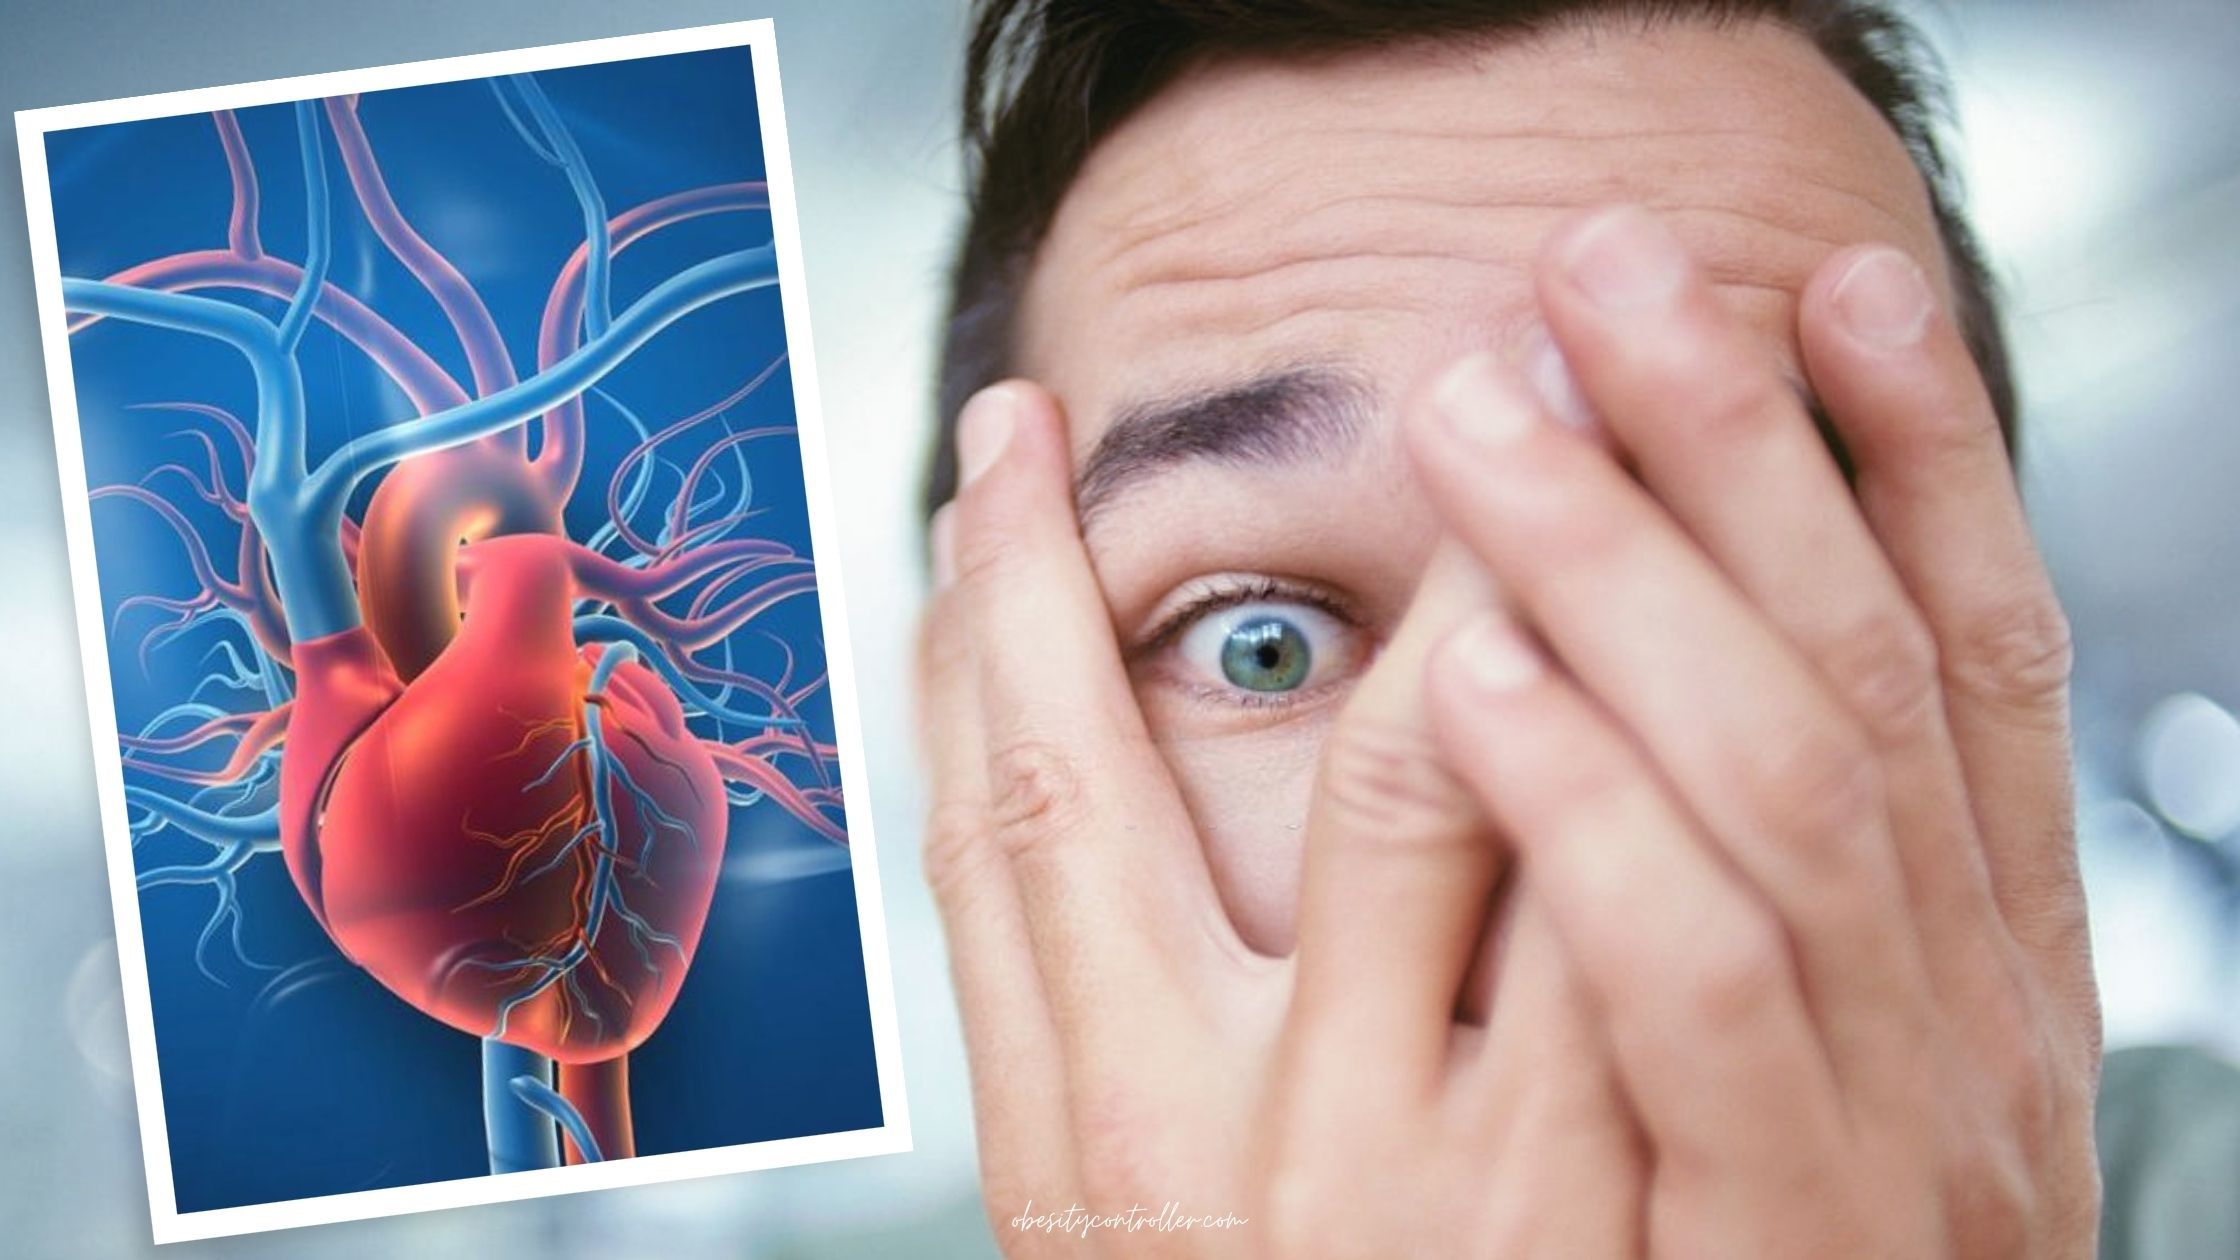 The Risk Of An Increase In Heart Disease In Men With Anxiety!